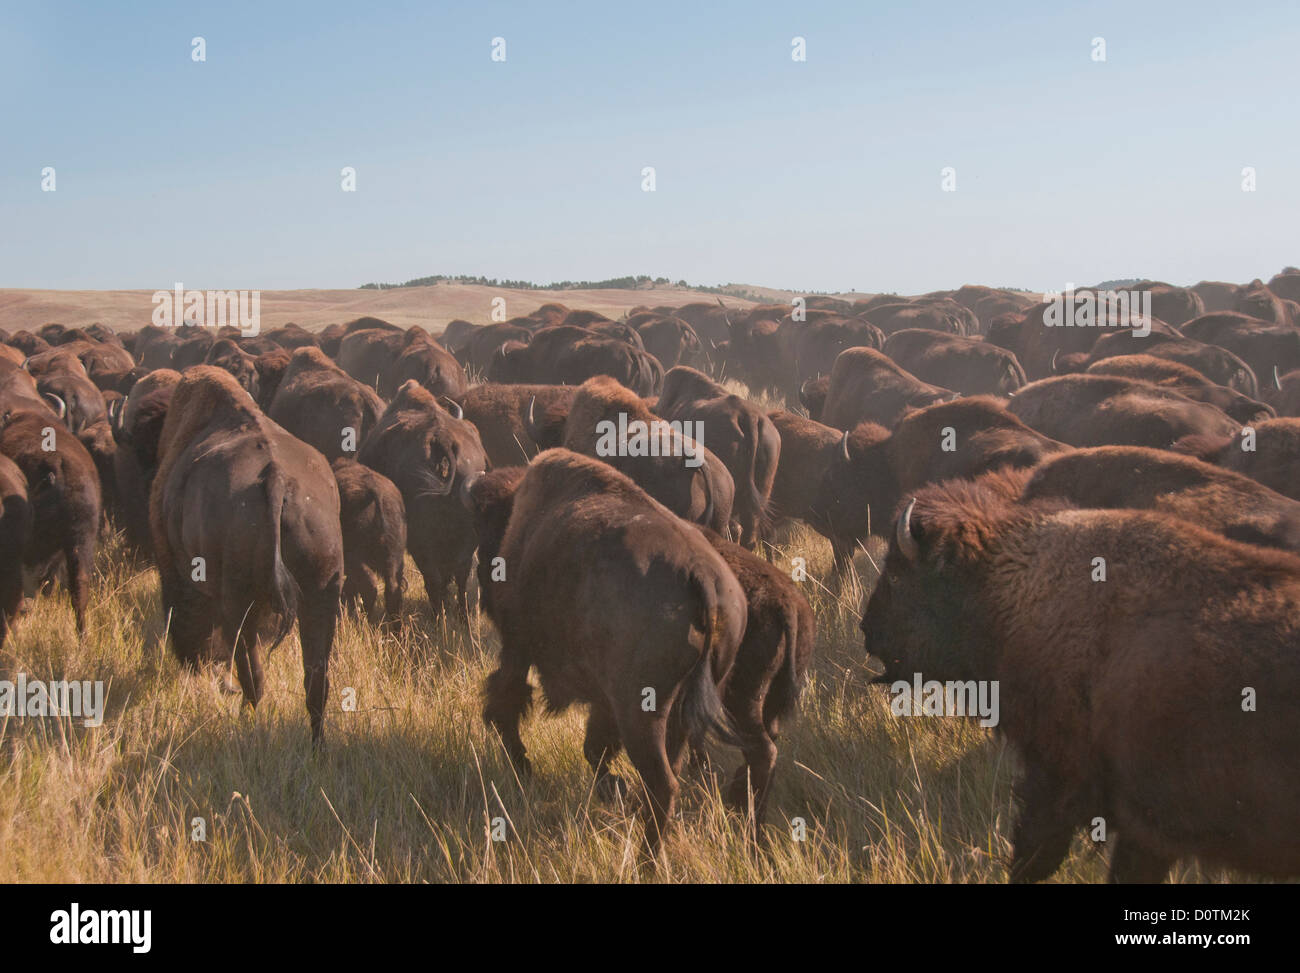 Bison, bos bison, buffalo, herd, foliage, autumn, fall, dust, stampede, prairie, grassland, Great Plains, Custer, State Park, he Stock Photo